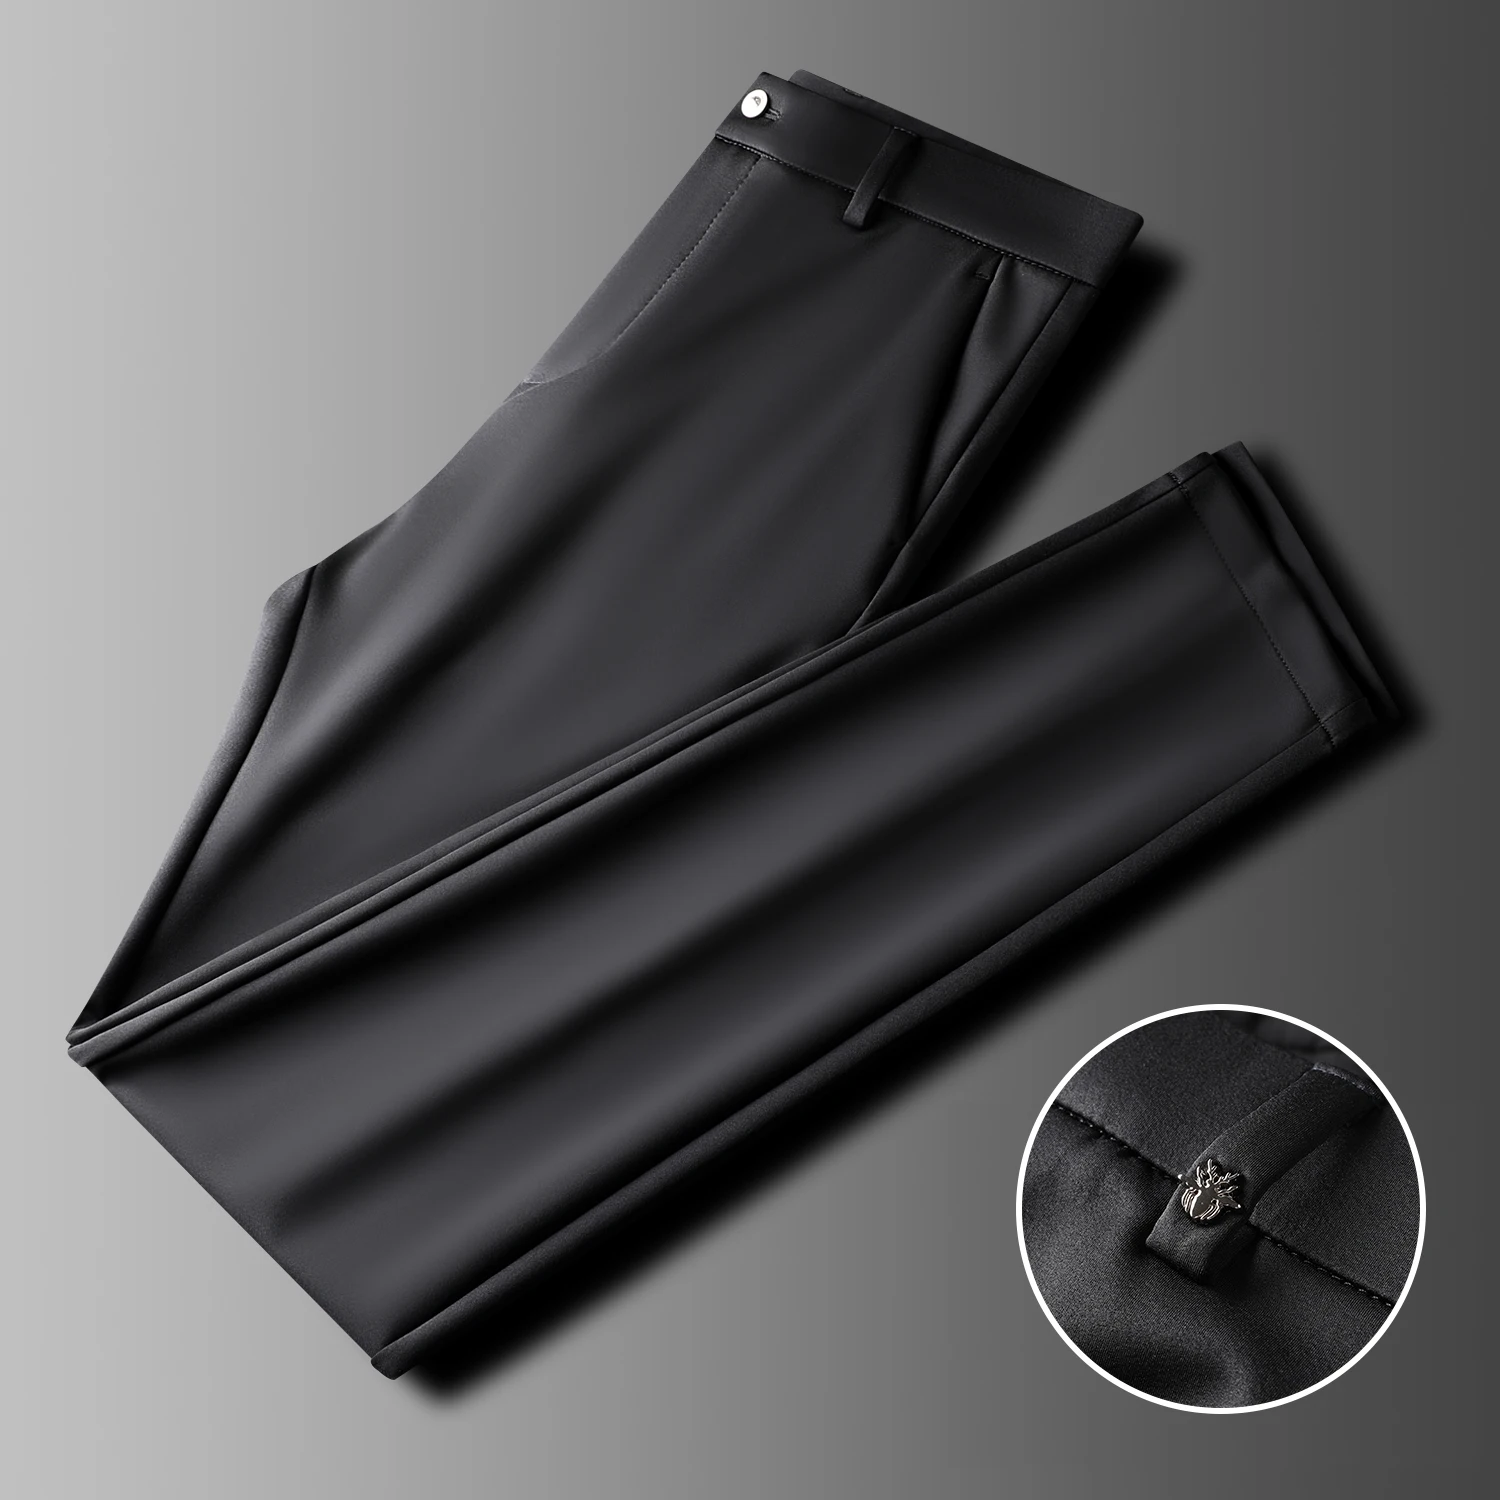 JSBDAutumn and winter high quality men's pants comfortable no-ironing fabric men's slim straight tube casual pants business vers